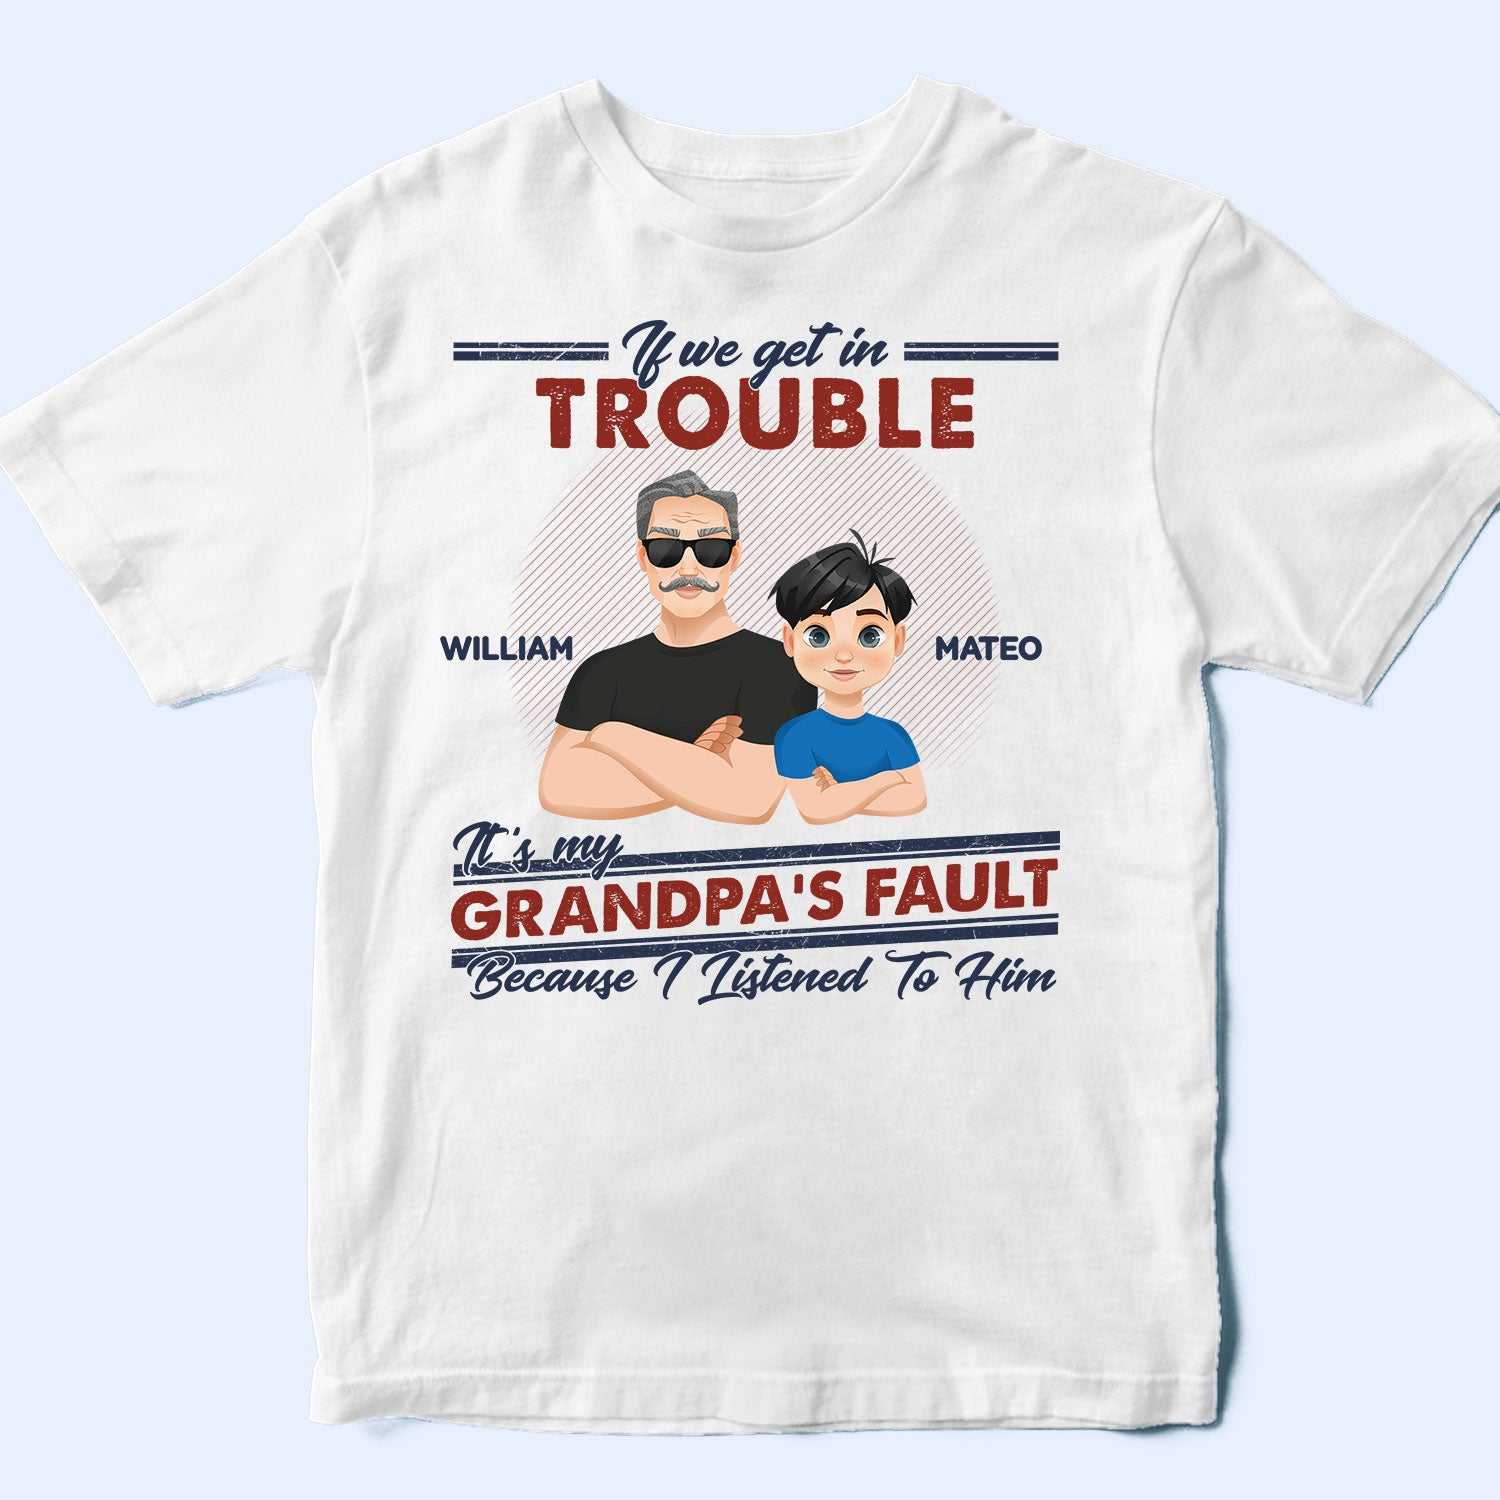 If We Get In Trouble - Gift For Grandpa, Grandma & Grandkids - Personalized T Shirt